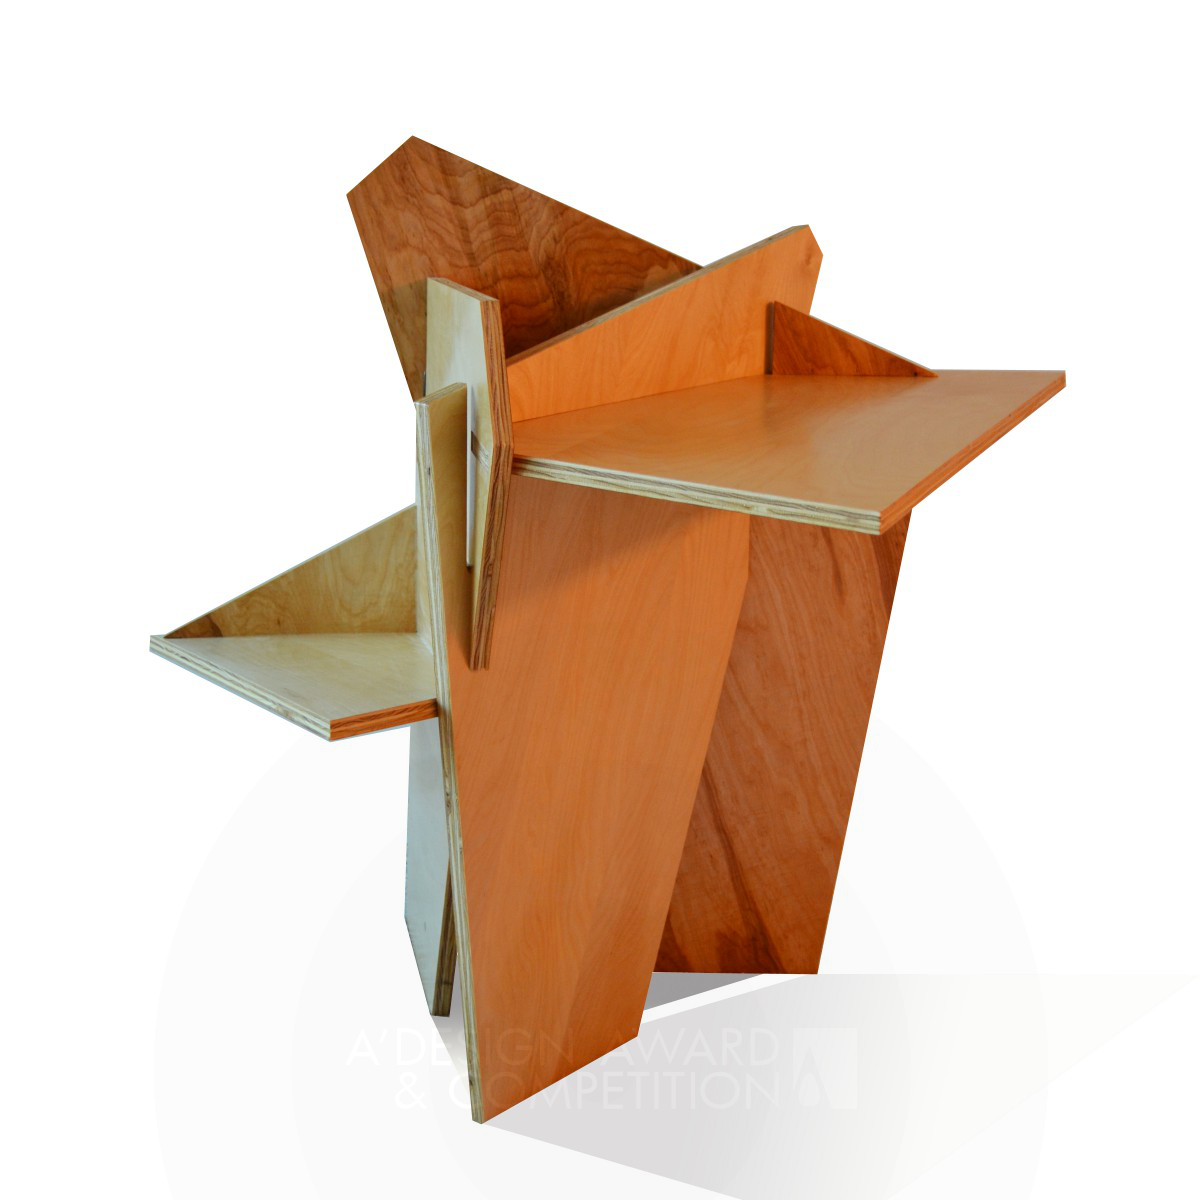 The Origami Rose Multifunctional Table by Joyce Chan